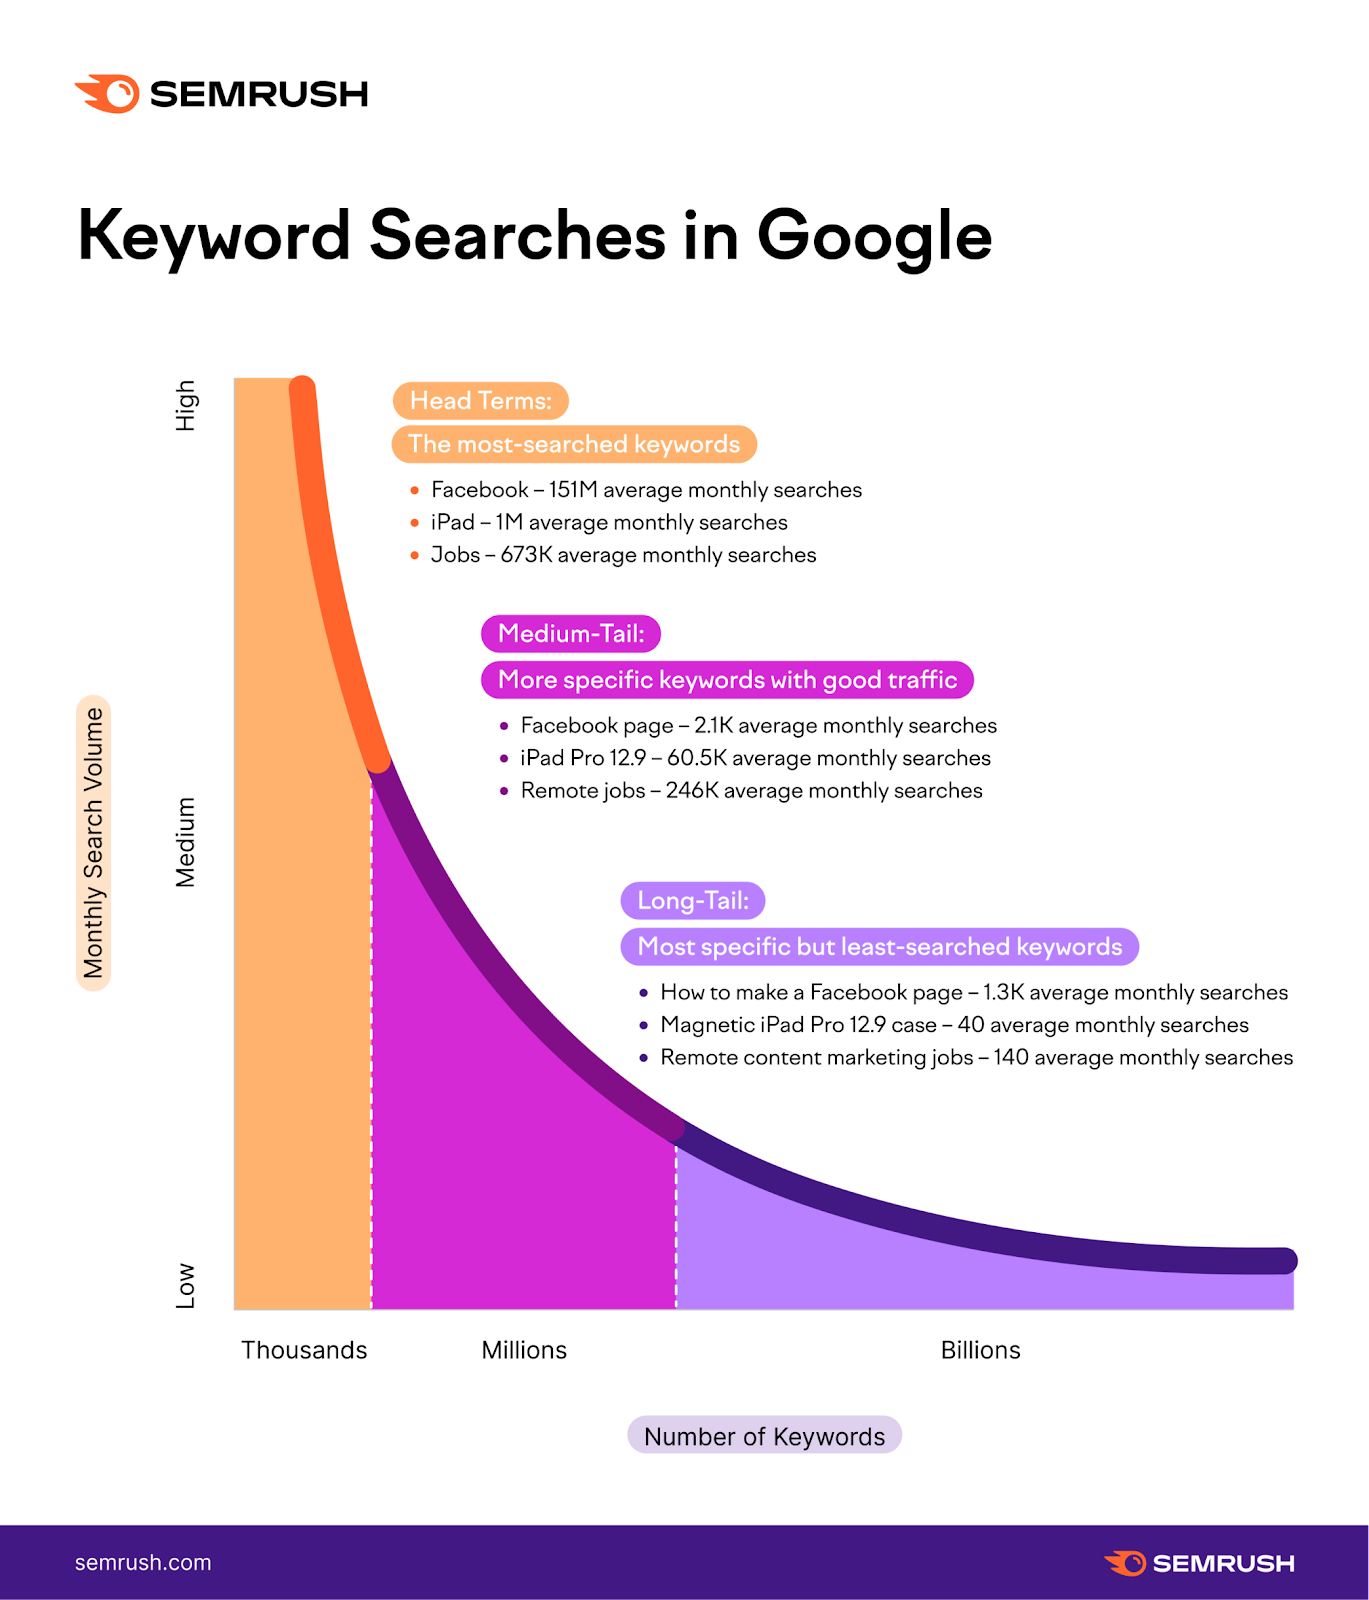 "Keyword Searches in Google" infographic displaying number of keywords and monthly search volume